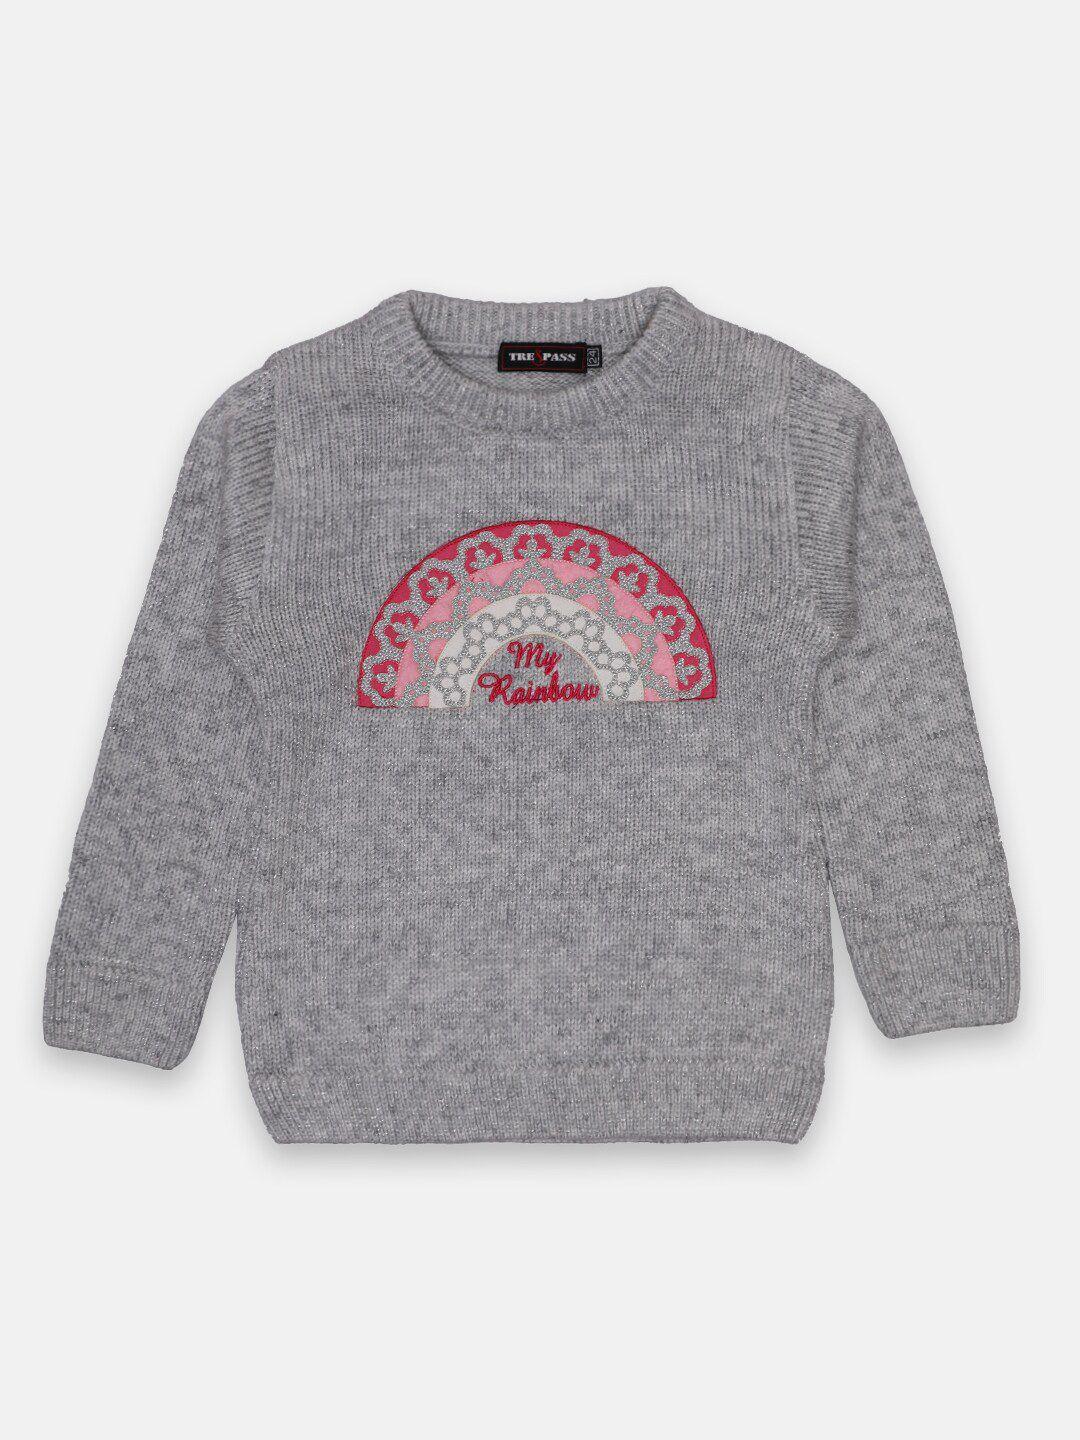 tre&pass-boys-grey-&-pink-embroidered-pullover-with-embroidered-detail